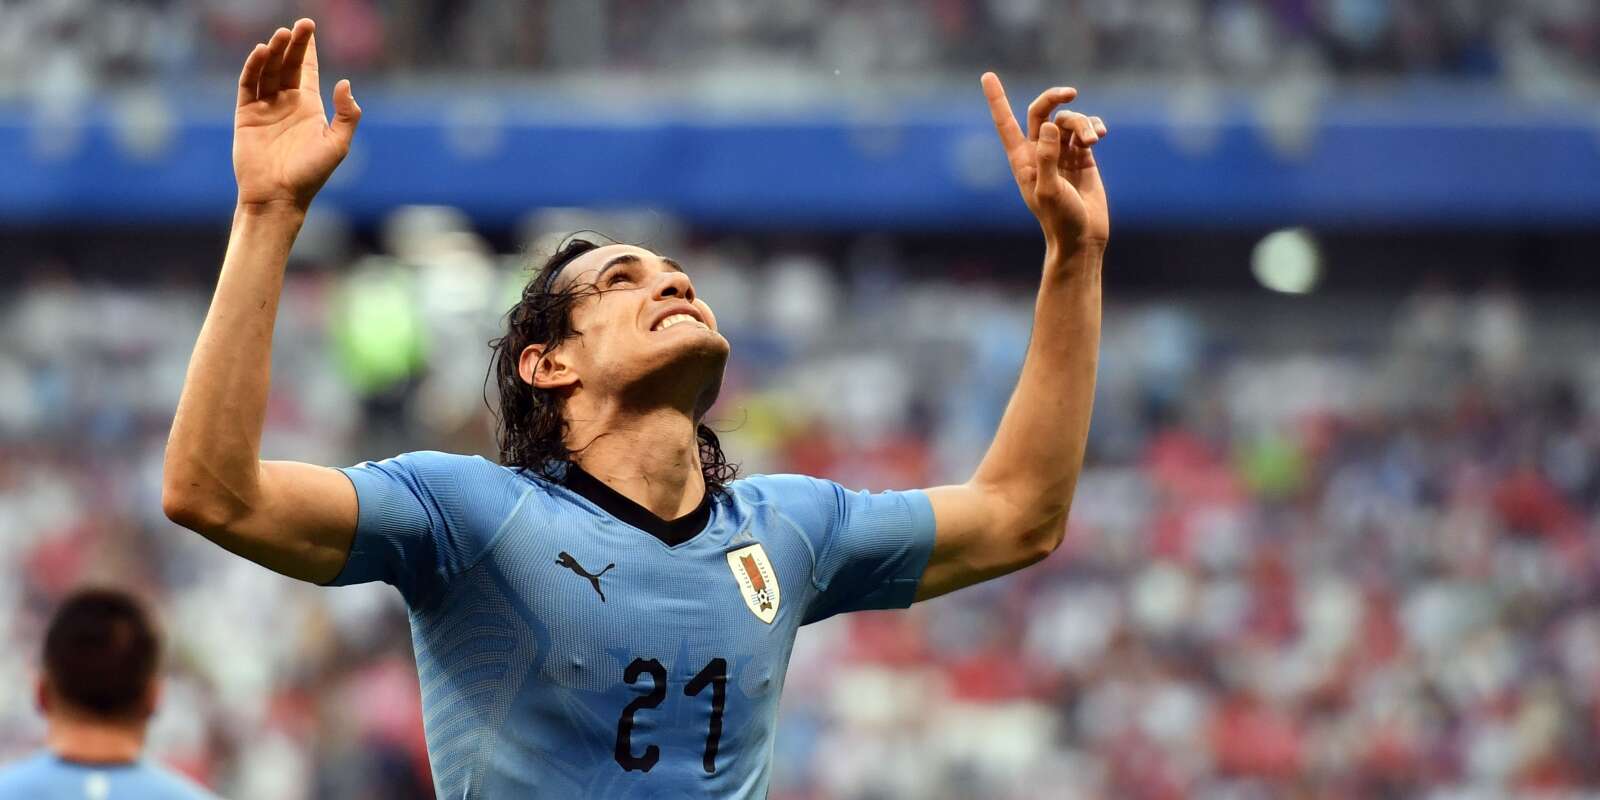 Uruguay's forward Edinson Cavani celebrates after scoring a goal during the Russia 2018 World Cup Group A football match between Uruguay and Russia at the Samara Arena in Samara on June 25, 2018. RESTRICTED TO EDITORIAL USE - NO MOBILE PUSH ALERTS/DOWNLOADS / AFP / Fabrice COFFRINI / RESTRICTED TO EDITORIAL USE - NO MOBILE PUSH ALERTS/DOWNLOADS